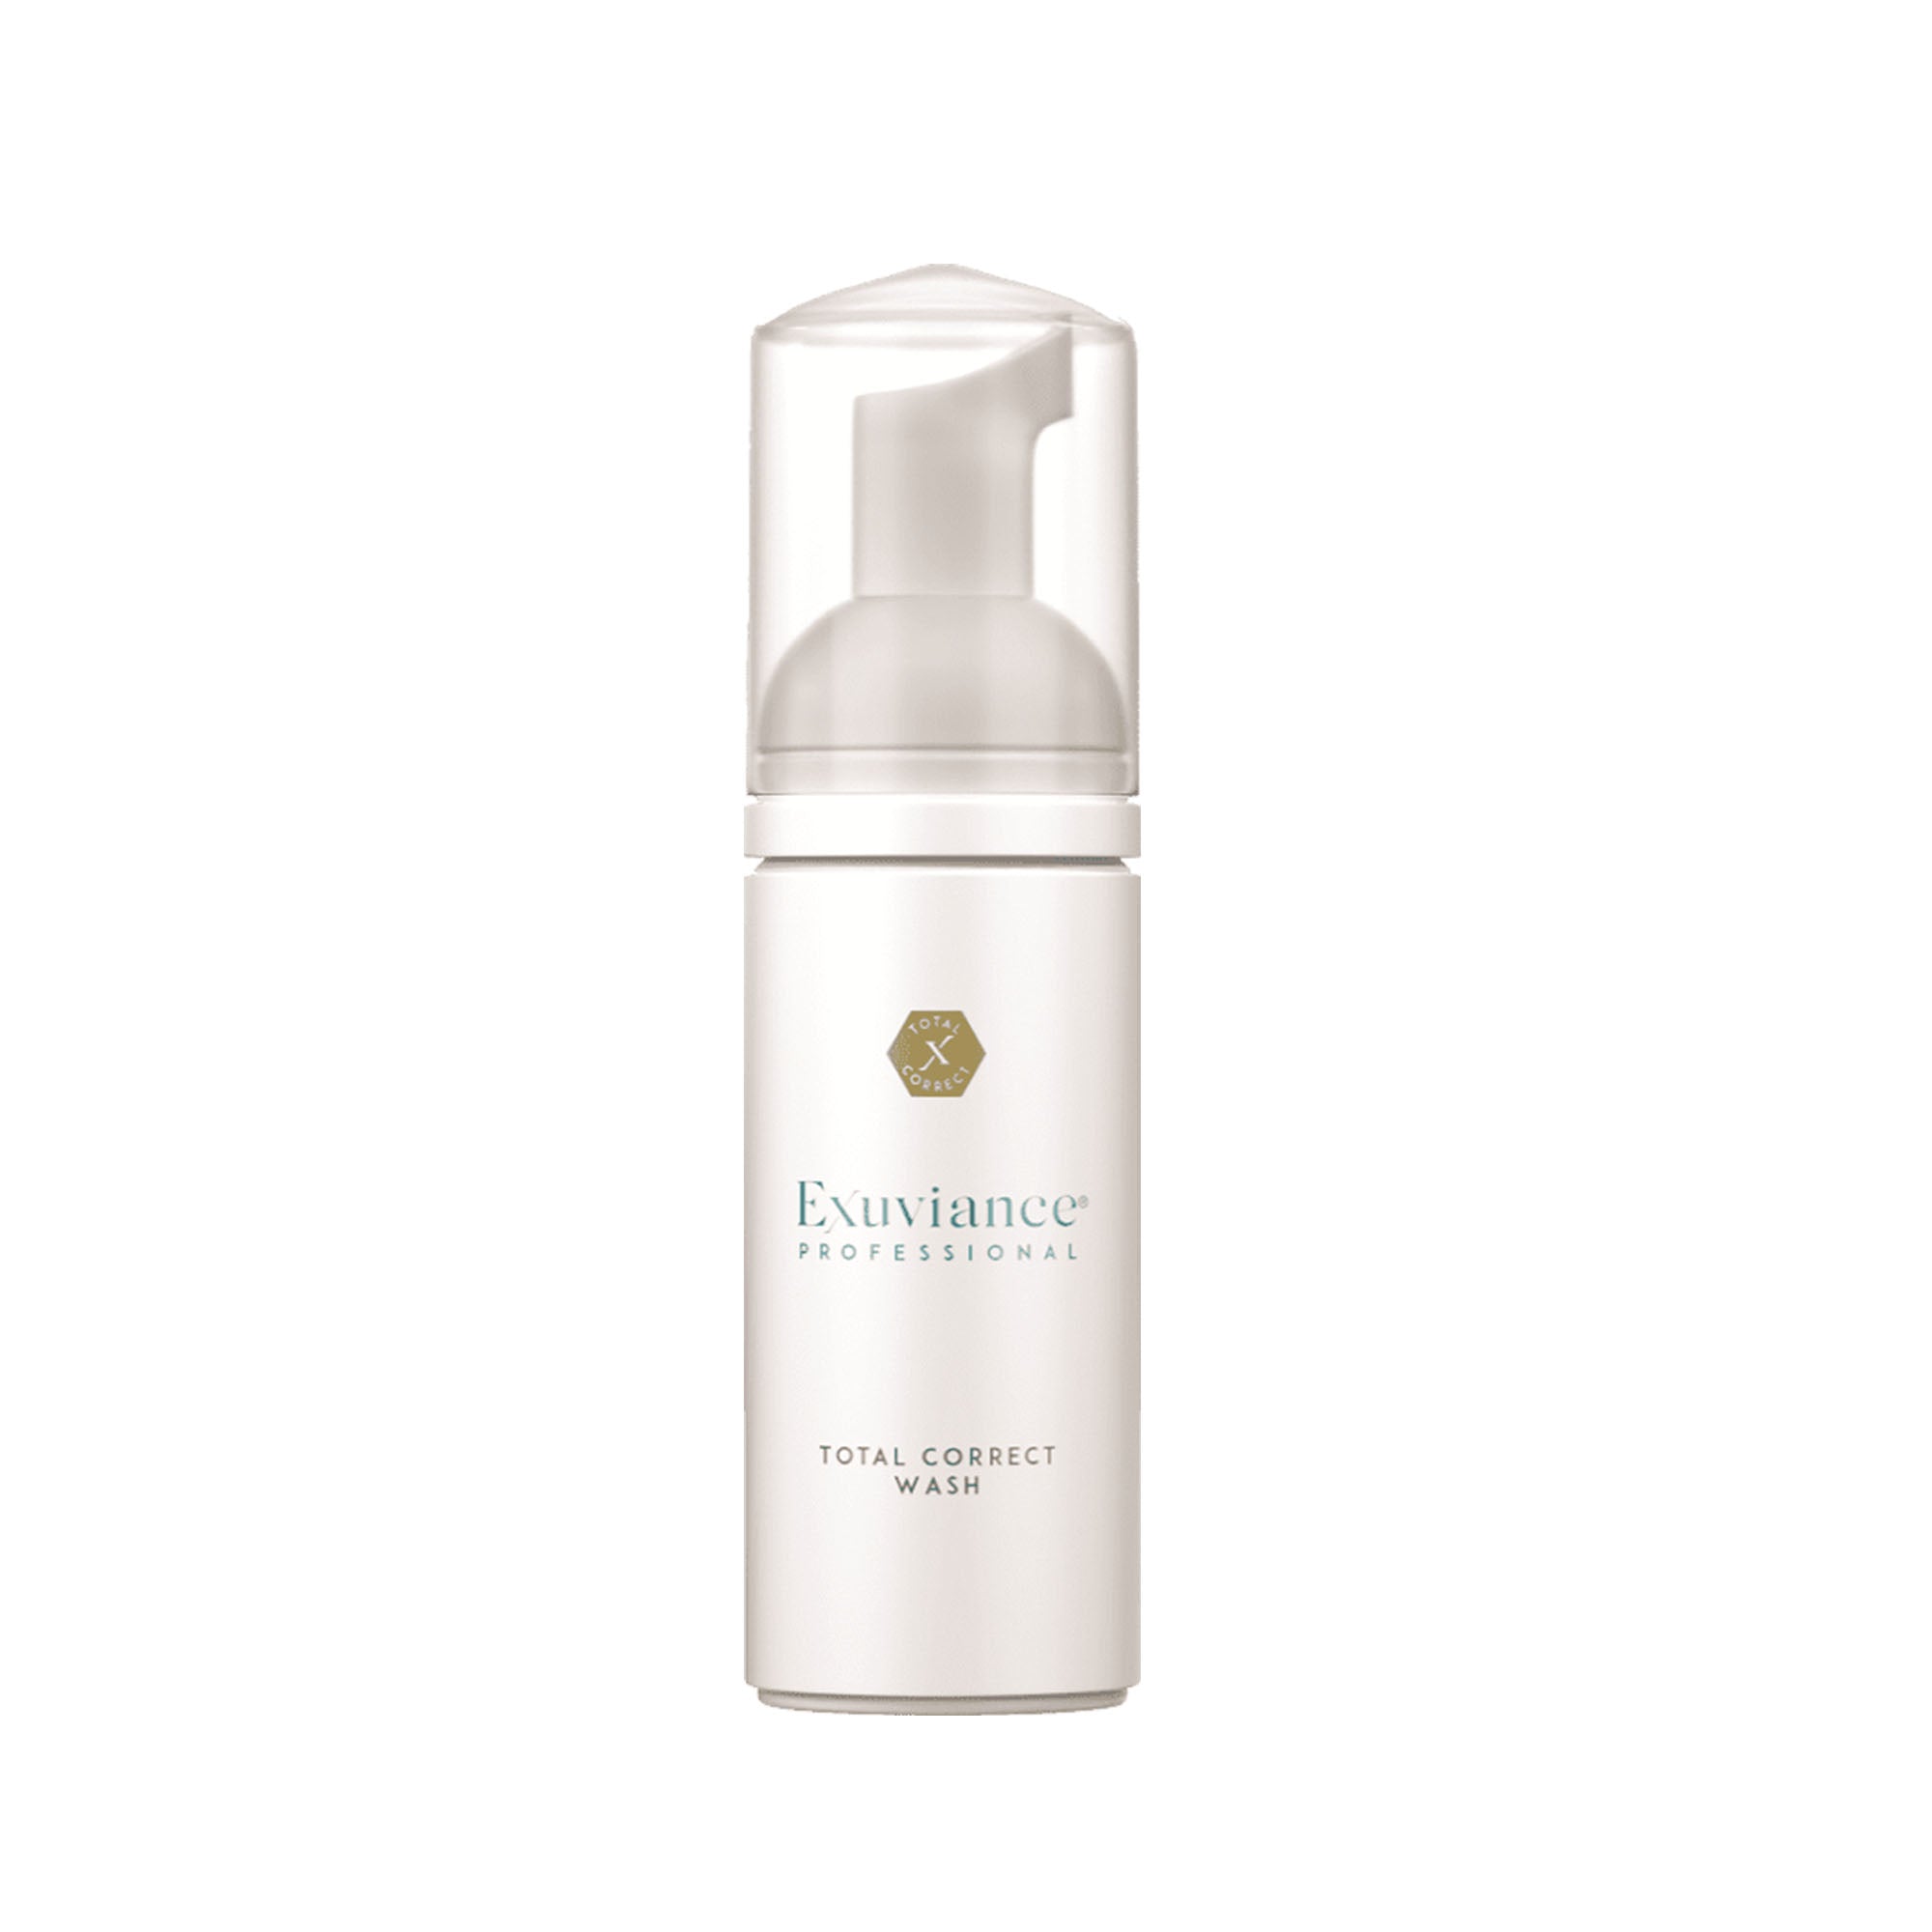 Exuviance Active Cleansing Foam | Total Correct Wash 125ml